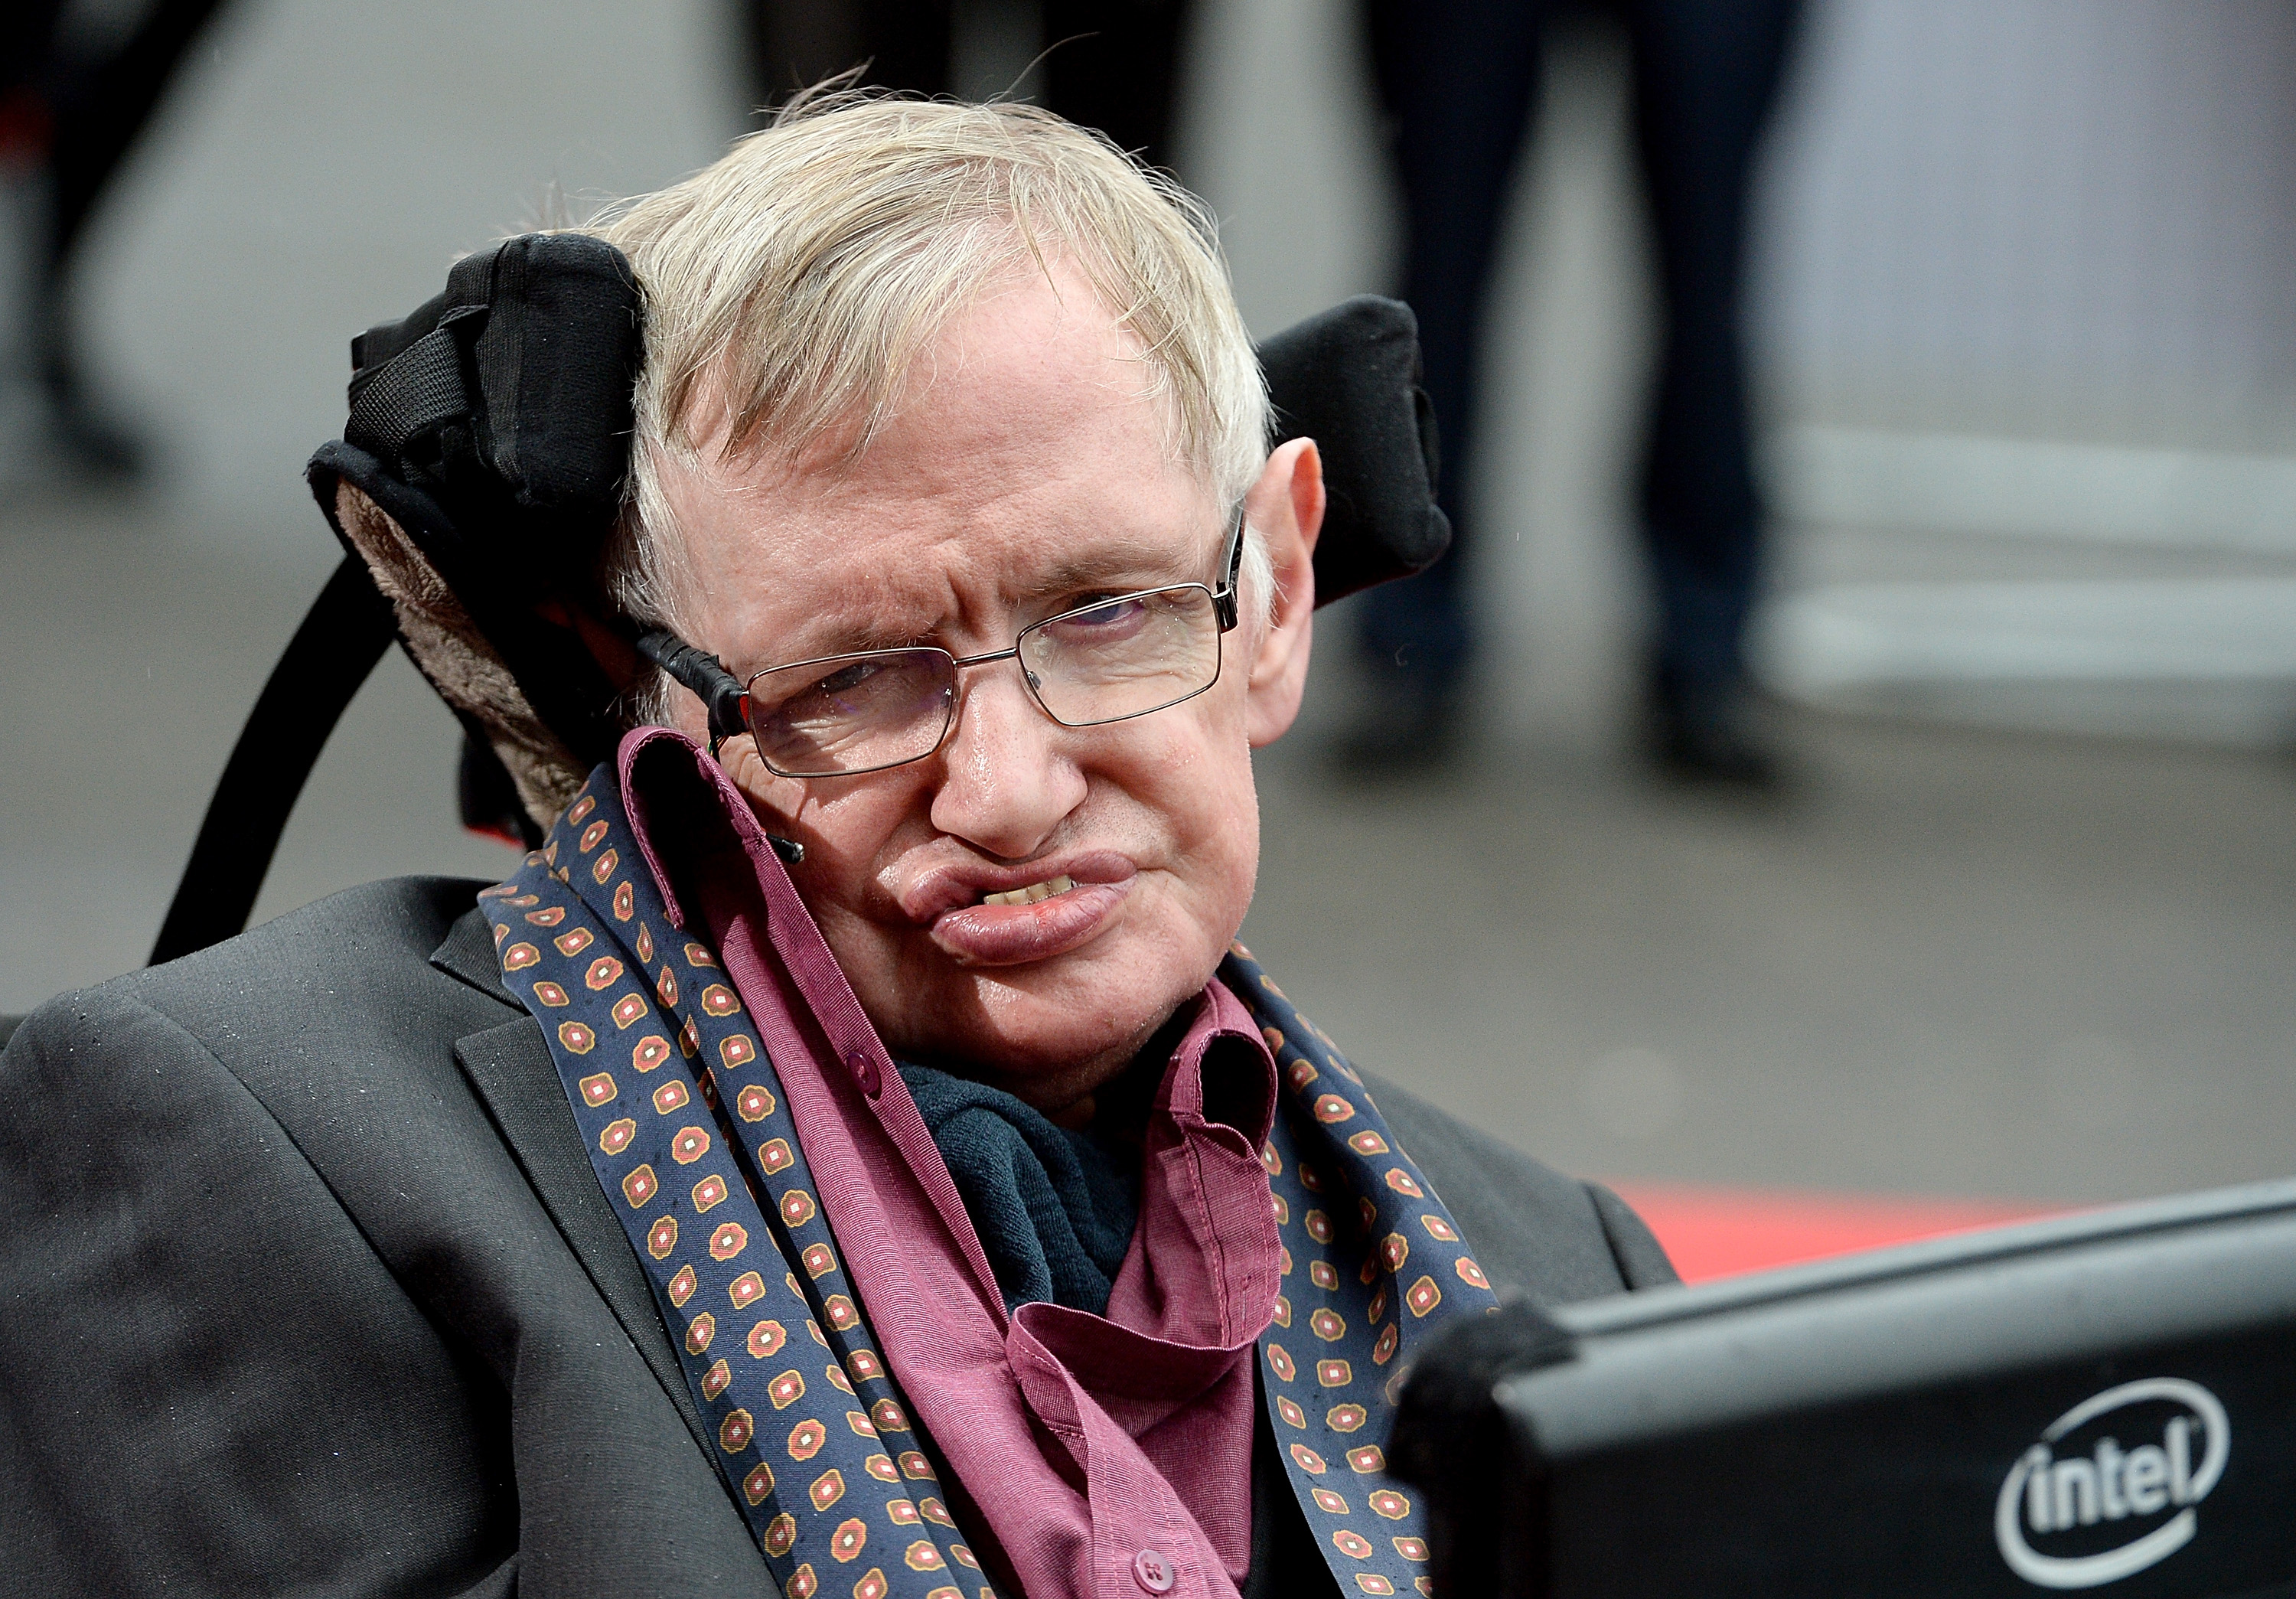 Stephen Hawking  attends "Interstellar Live" at Royal Albert Hall on March 30, 2015 in London, England.